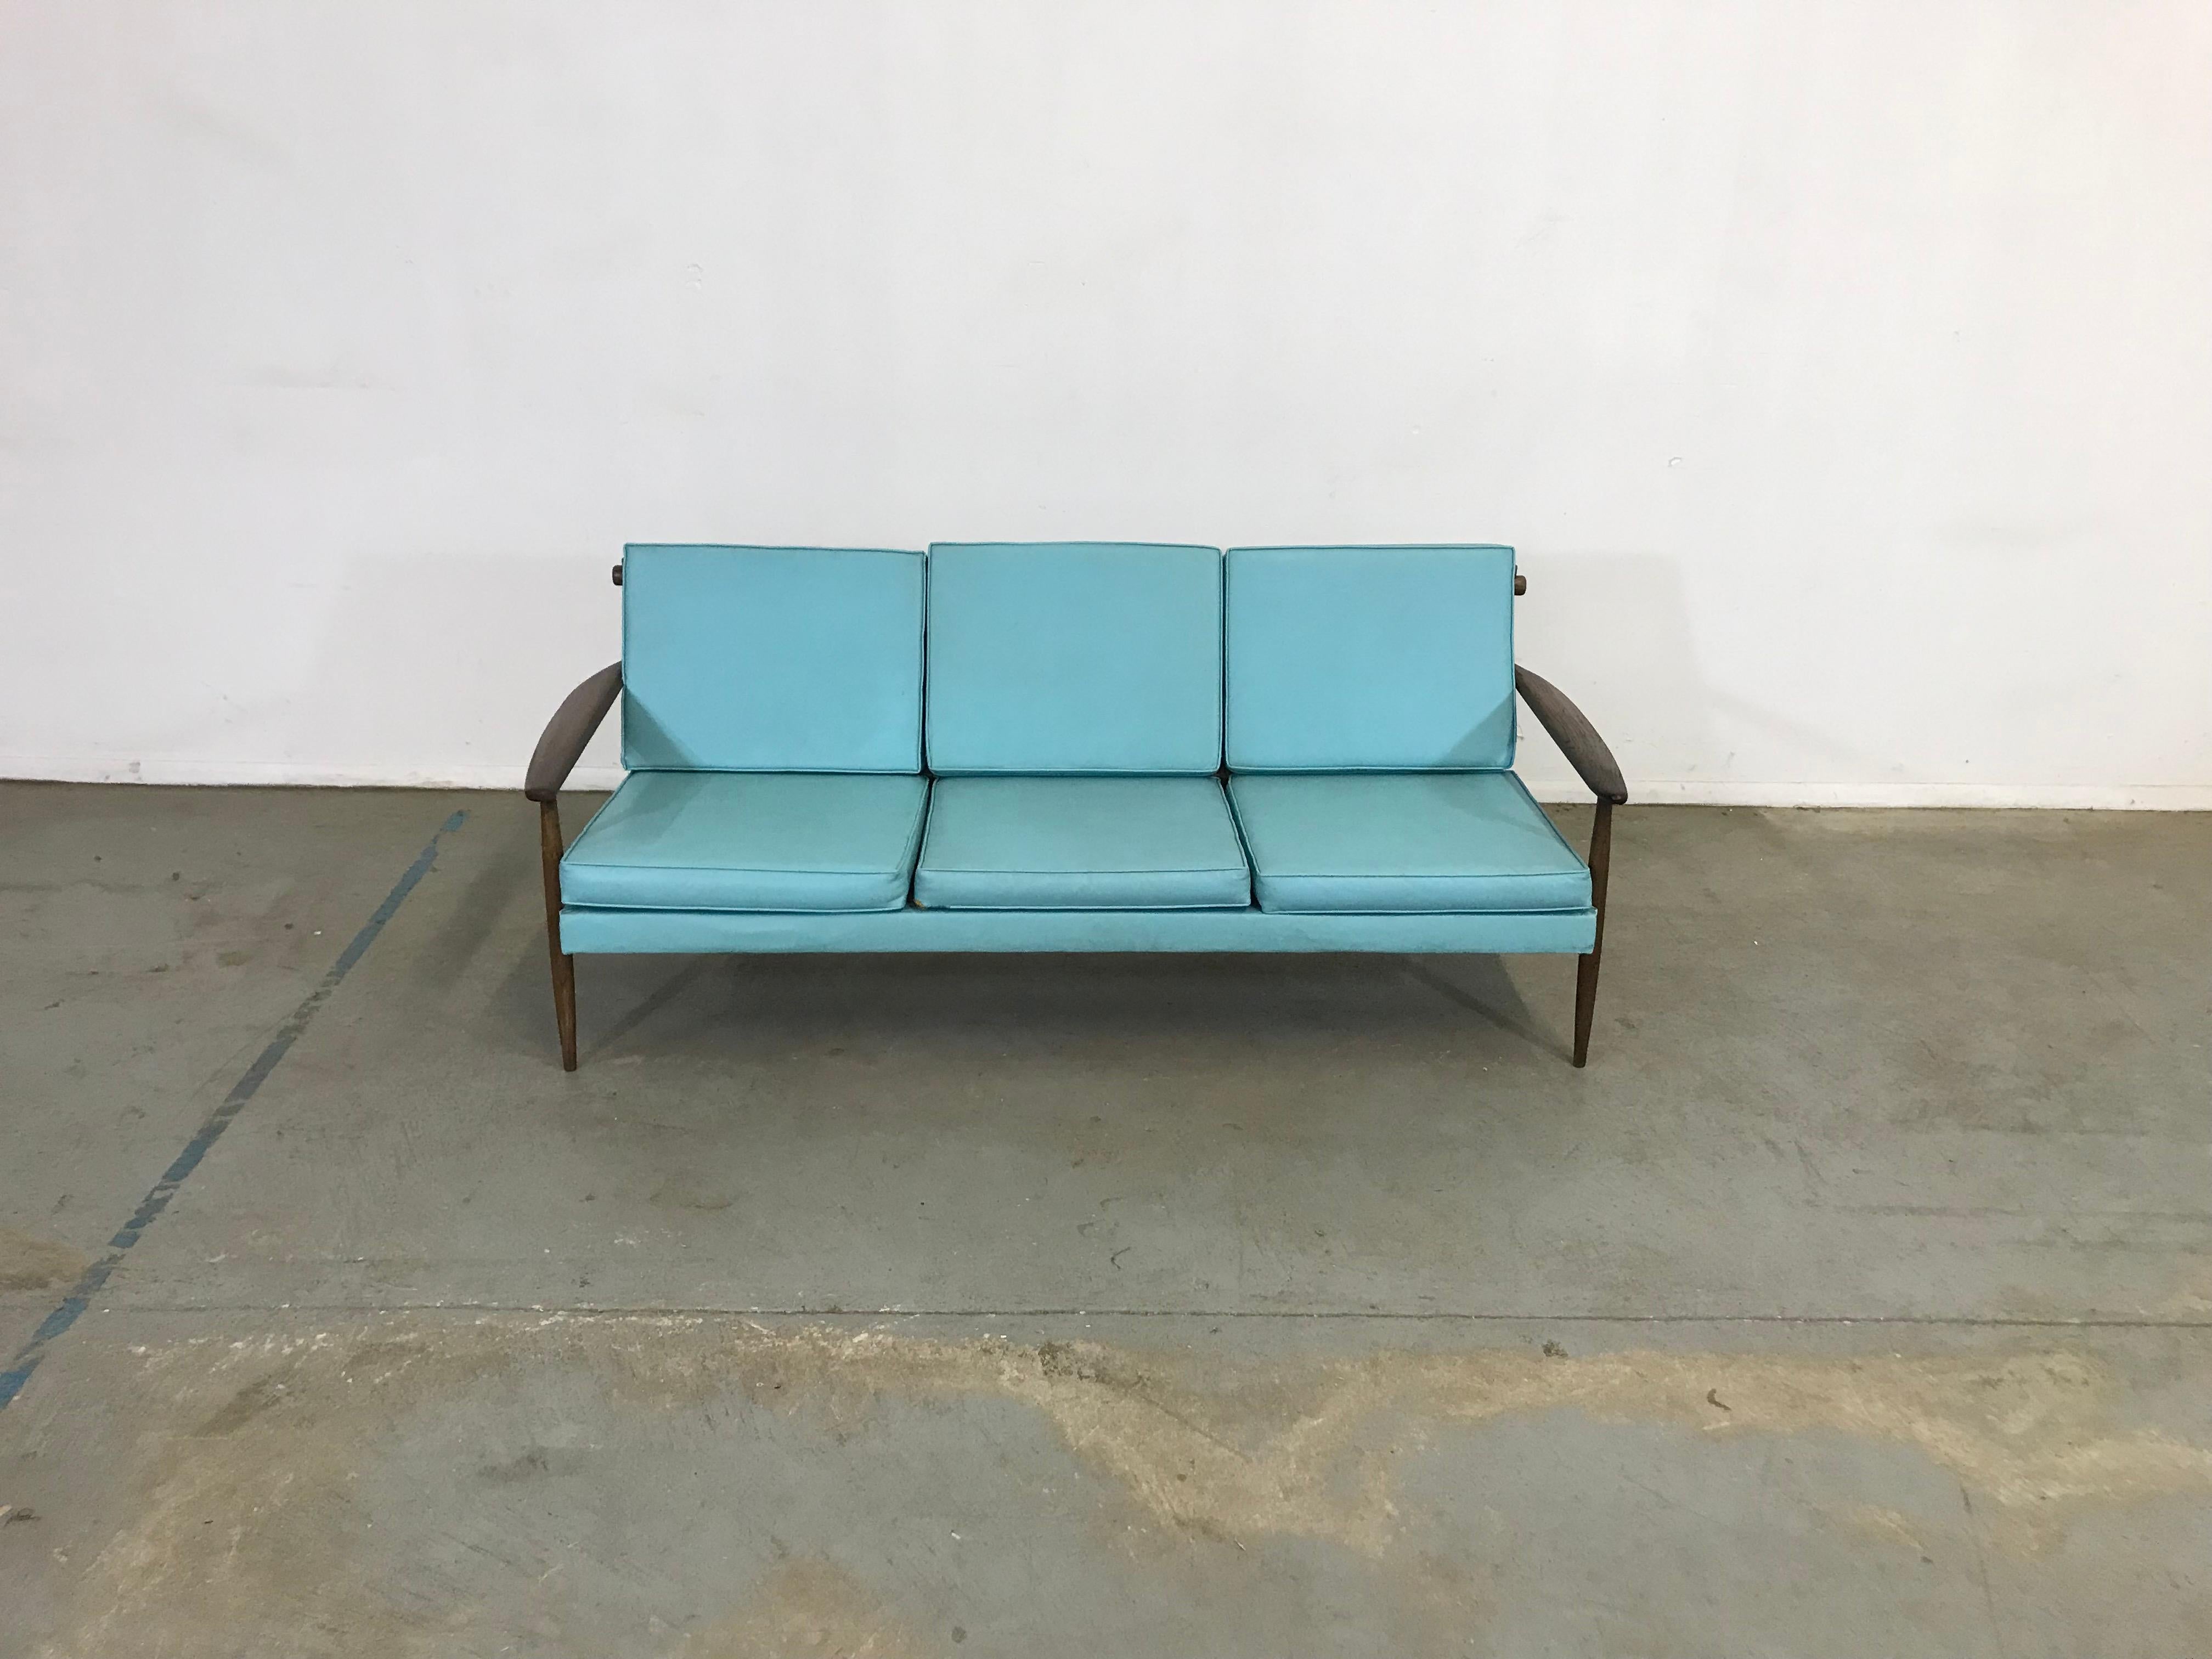 Mid-Century 3 cushion vikko sofa

Offered is an unrestored Mid-Century Modern sofa. The sofa can stand to be reupholstered but it is overall structurally sound. Has some scratches on the legs. The upholstery has staining and fading and some tears.